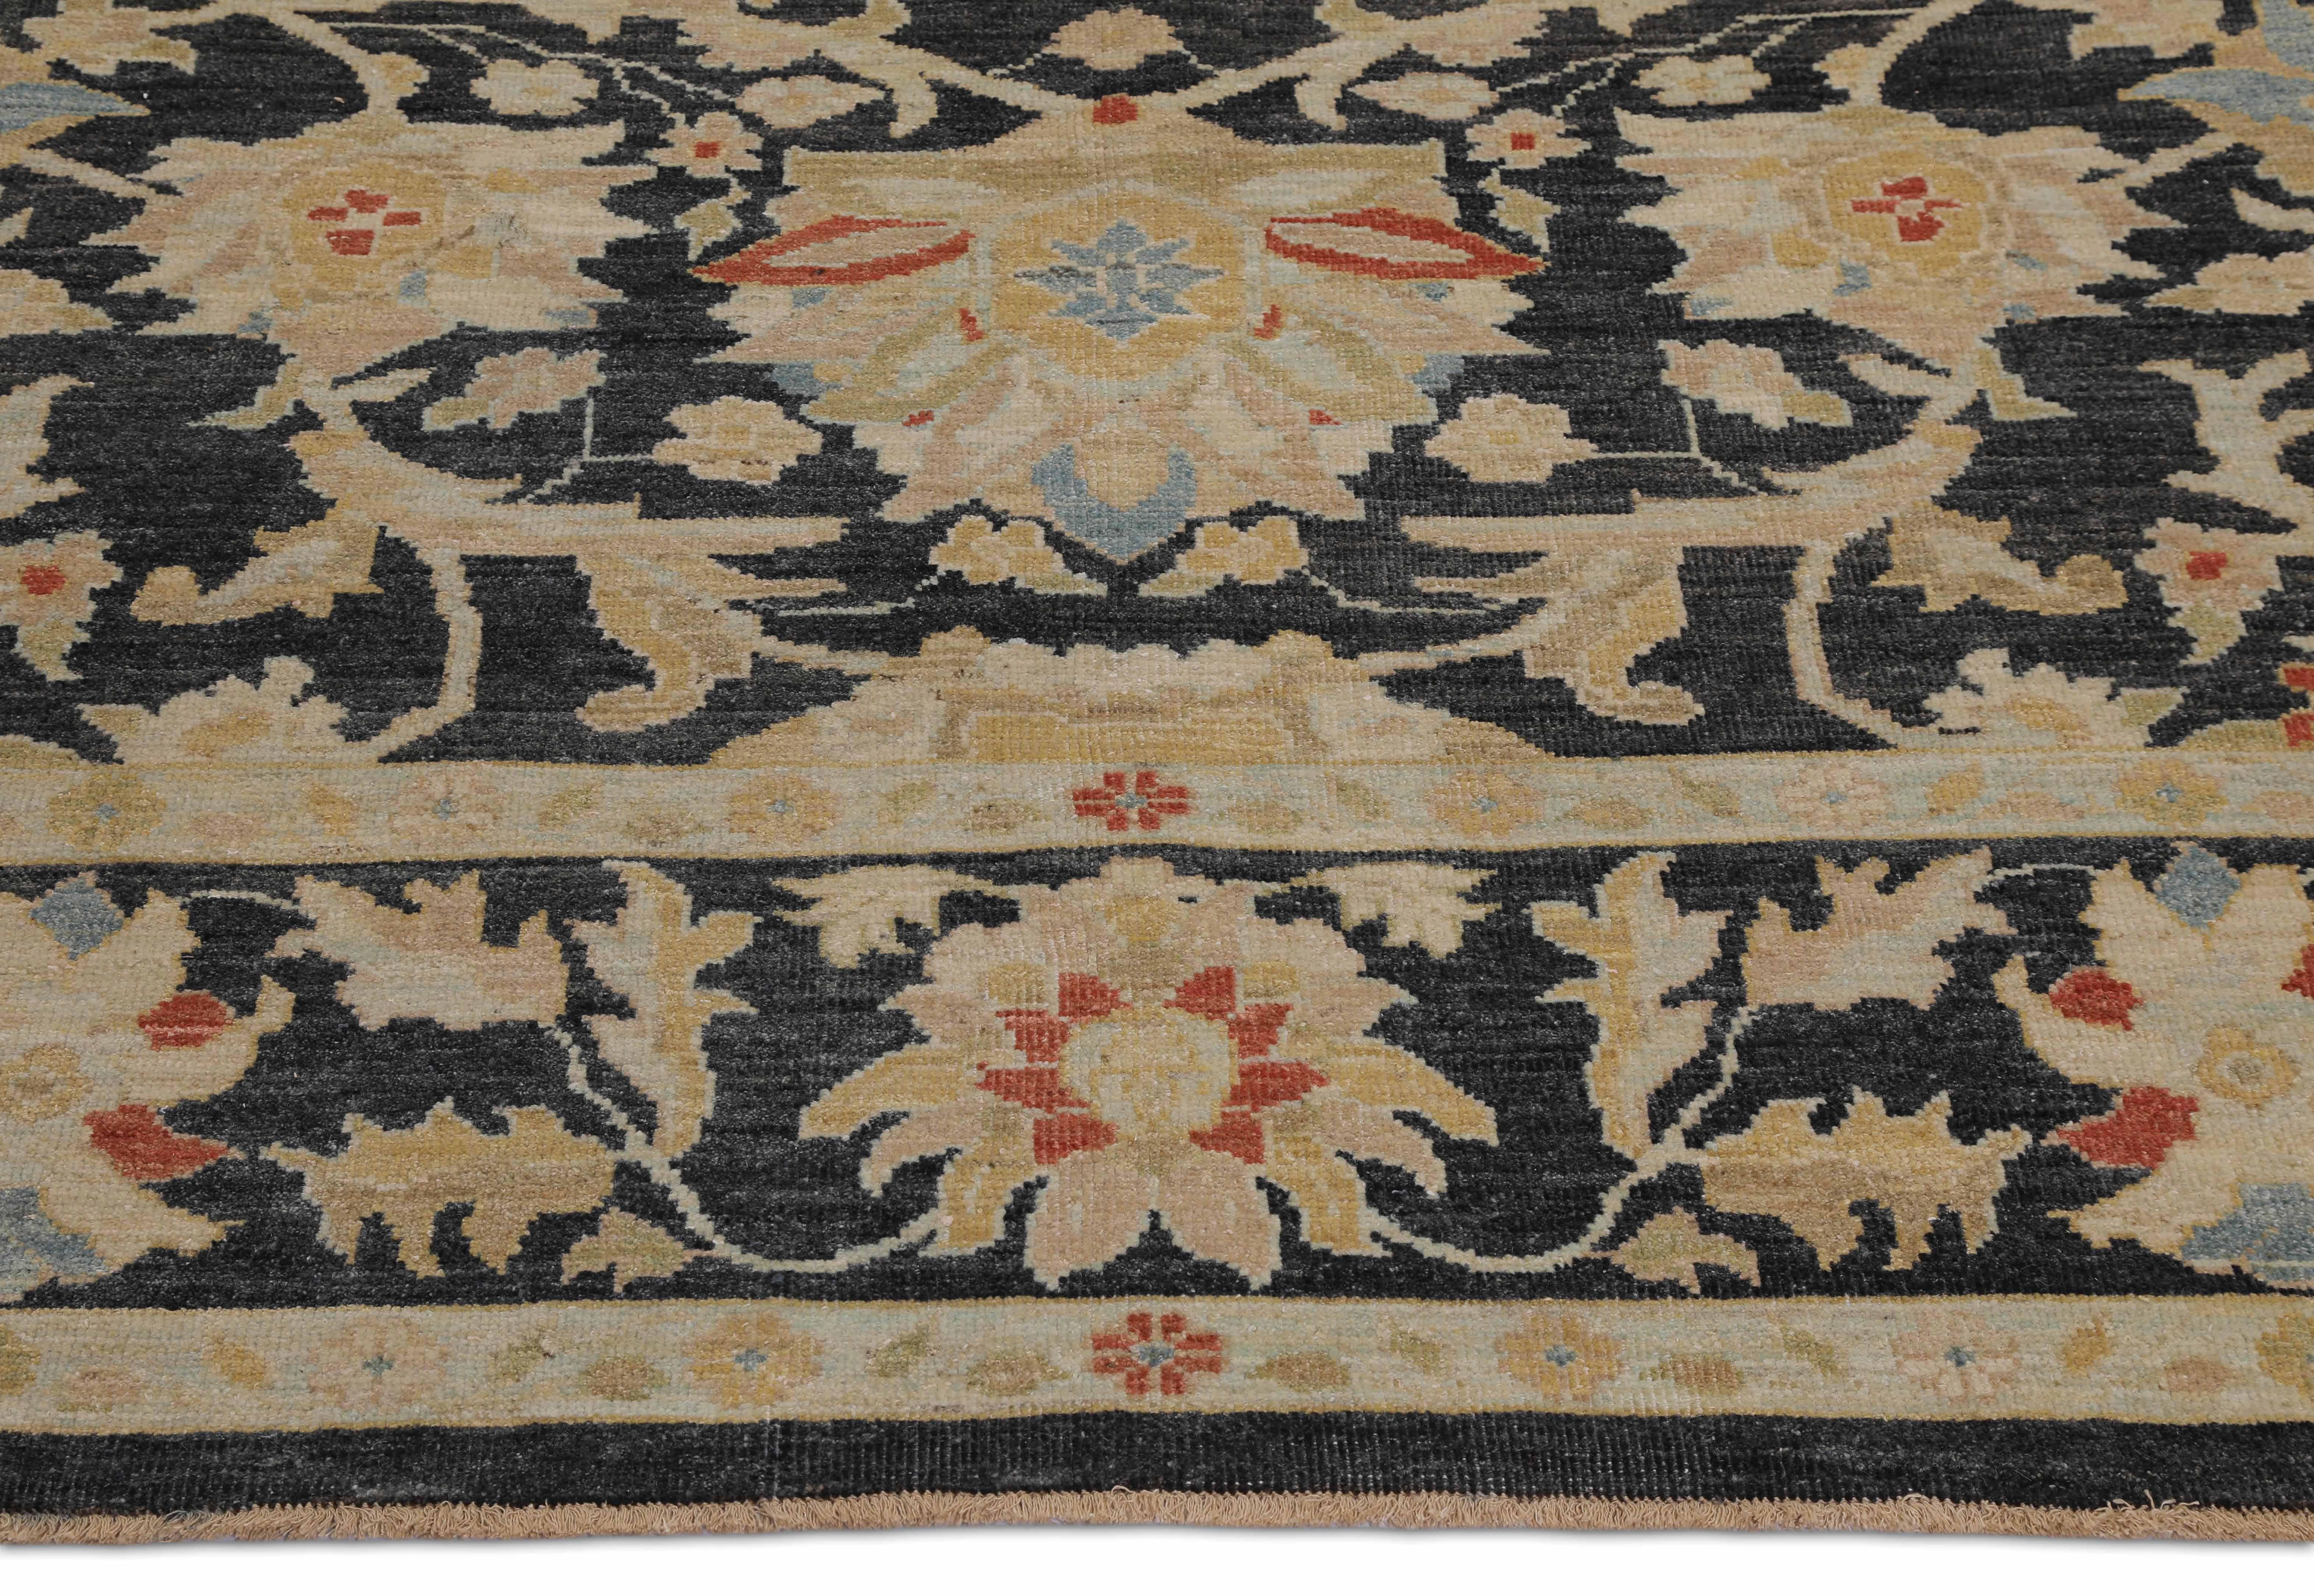 Handmade Turkish area rug from high-quality sheep’s wool and colored with eco-friendly vegetable dyes that are proven safe for humans and pets alike. It’s a Classic Sultanabad design featuring a regal black field with a colored mix of Herati flower